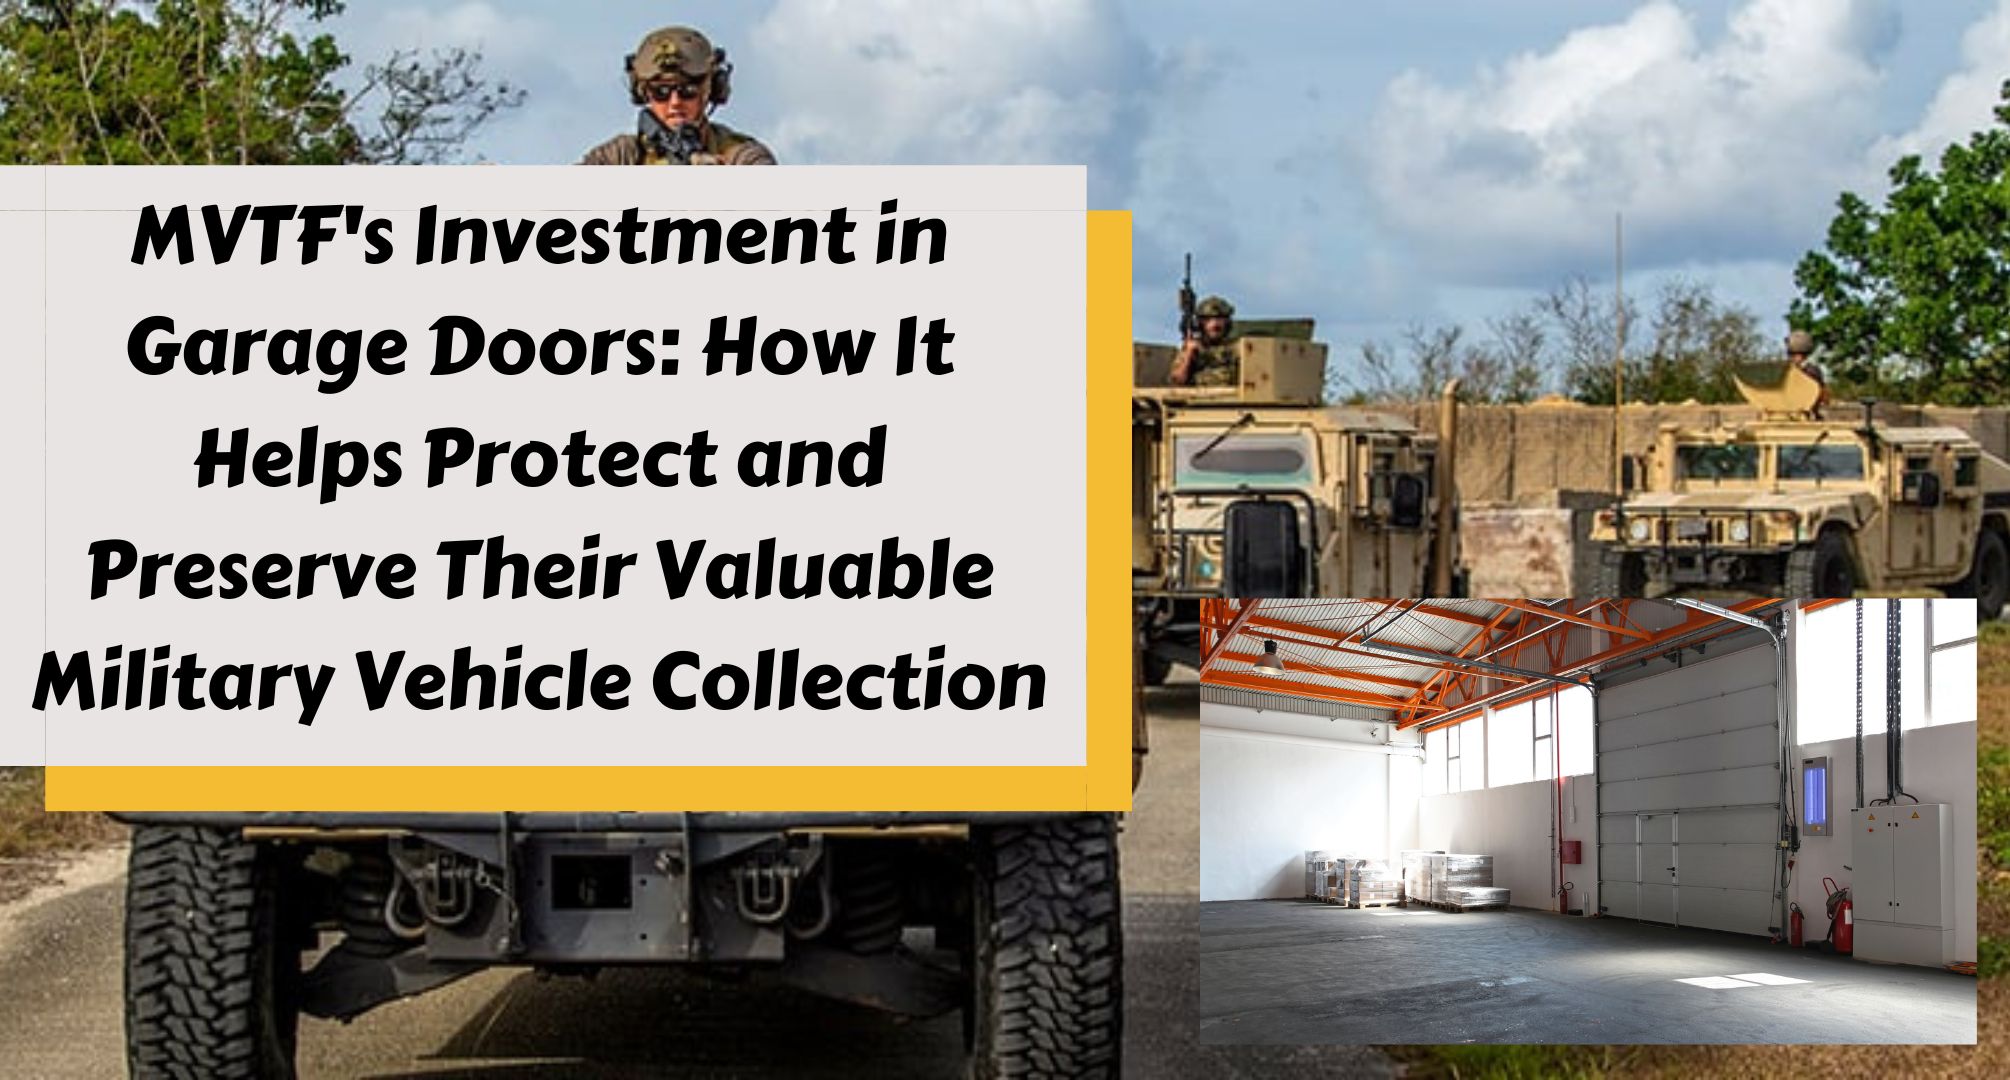 MVTF's Investment in Garage Doors: How It Helps Protect and Preserve Their Valuable Military Vehicle Collection